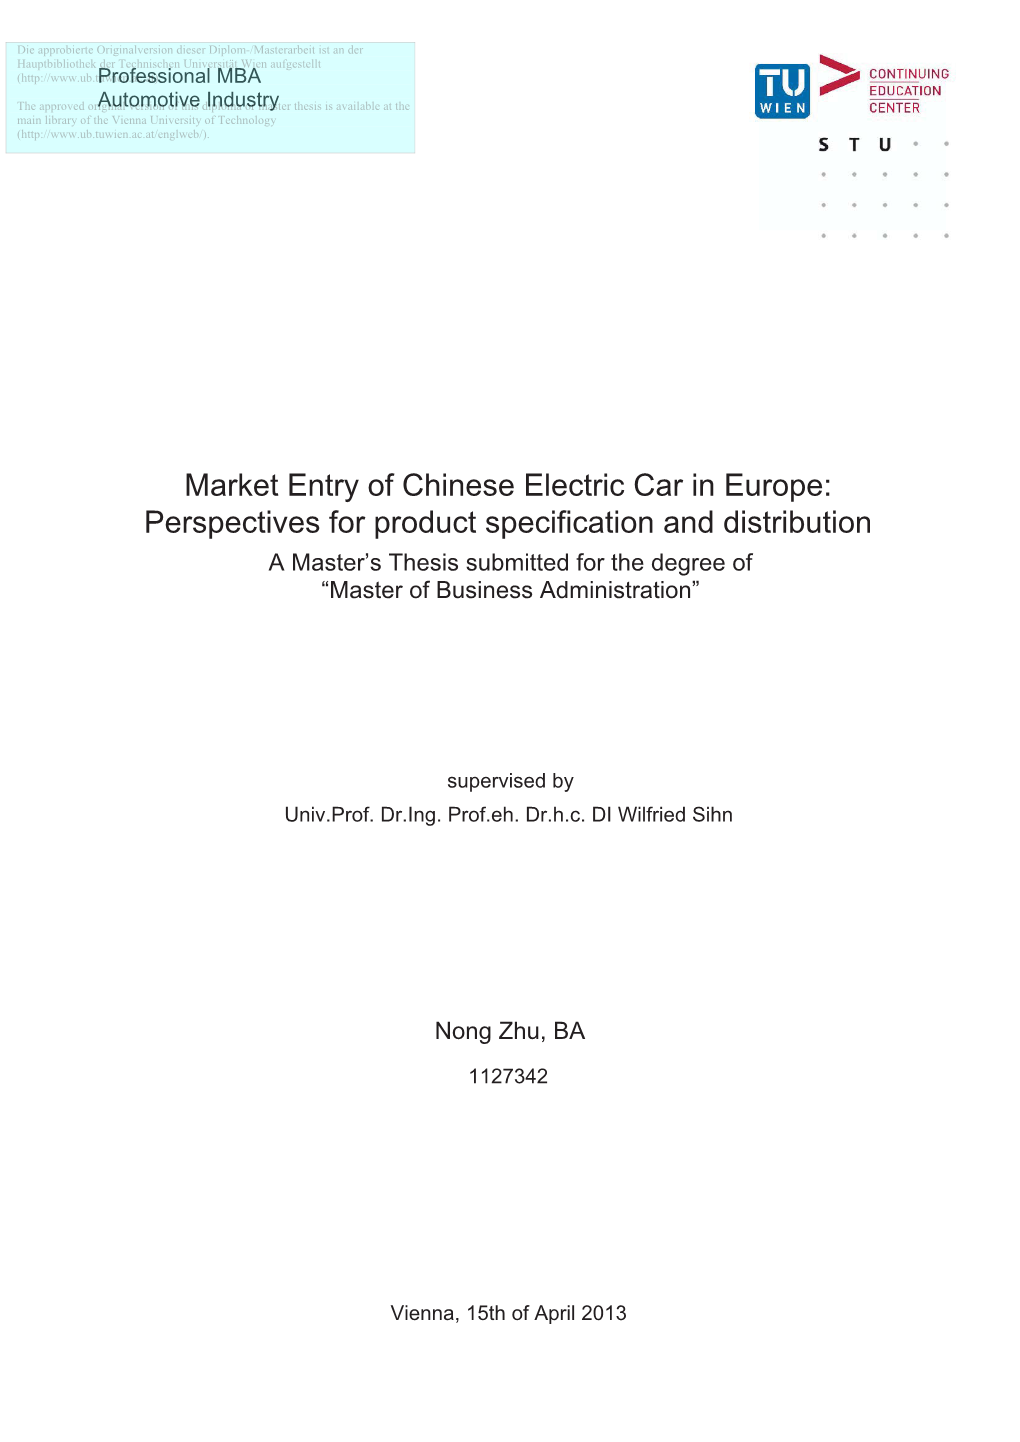 Market Entry of Chinese Electric Car in Europe